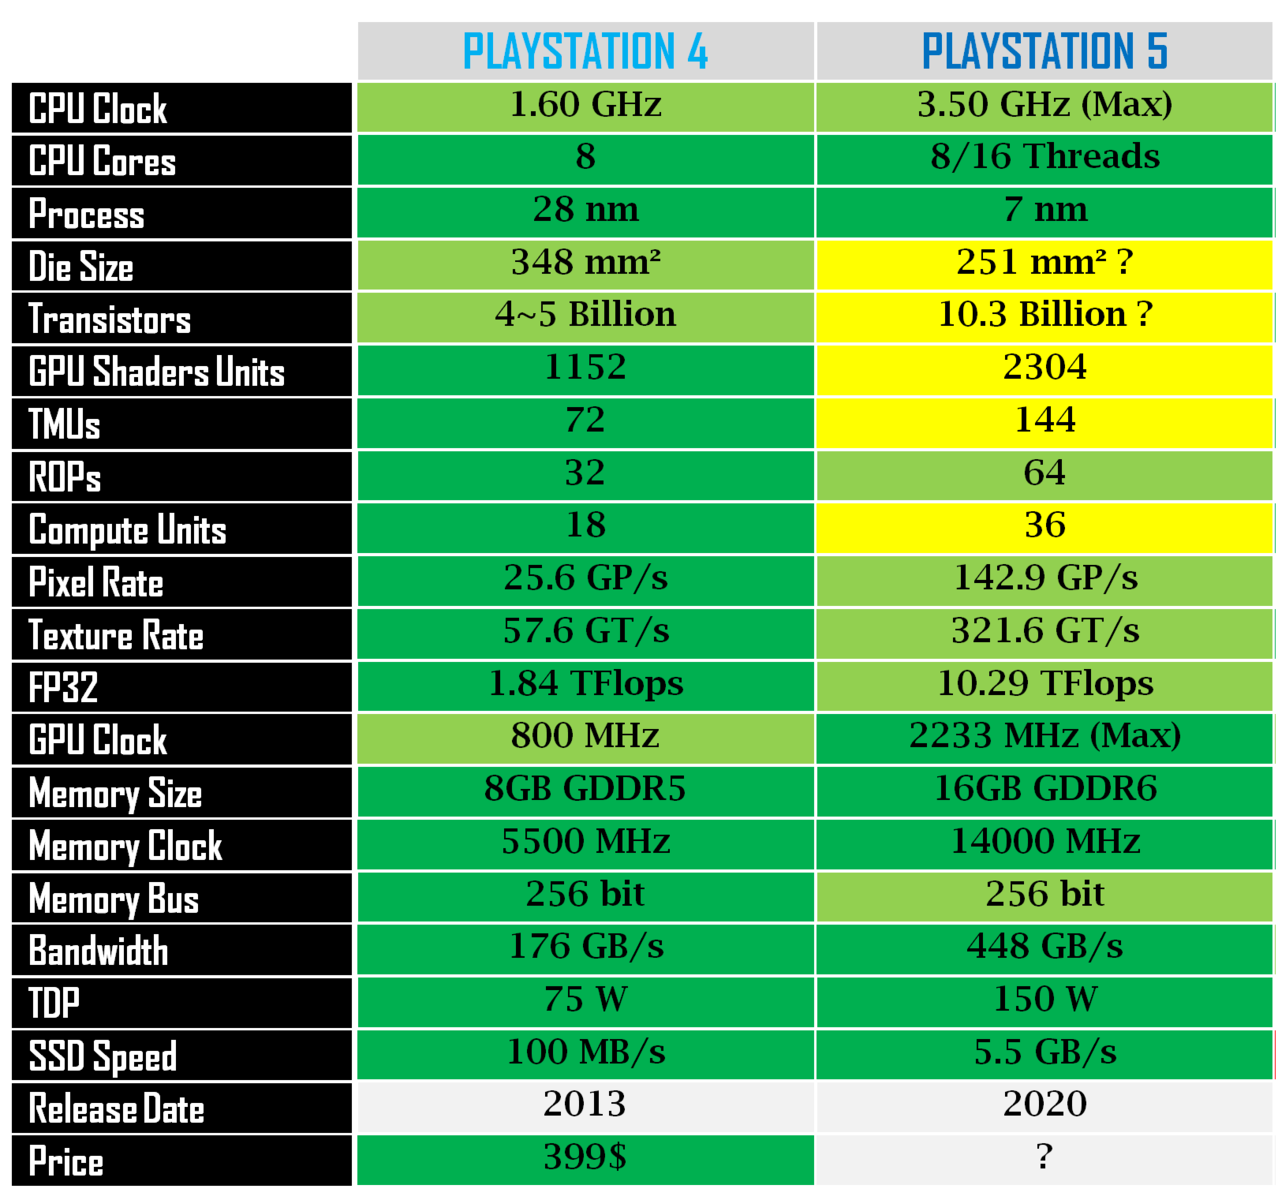 Impressive graphic should cheer up disappointed PlayStation 5 fans focusing too on the Xbox Series X power advantage - NotebookCheck.net News